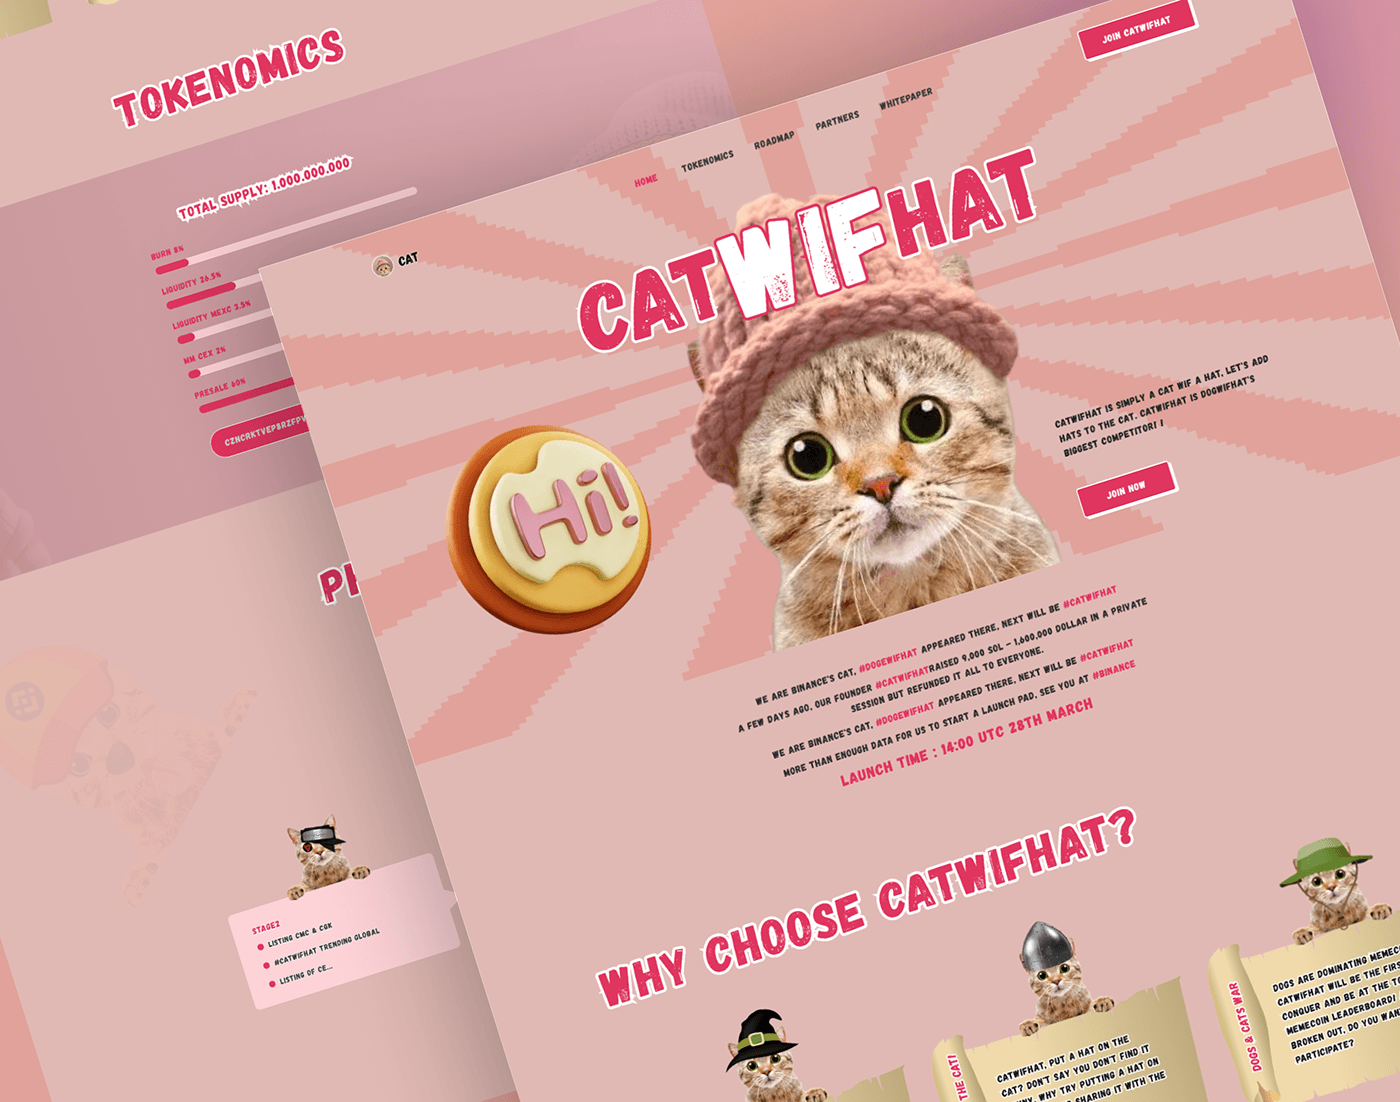 meme coin landing page pepe meme coin website catwifhat perry solana chain